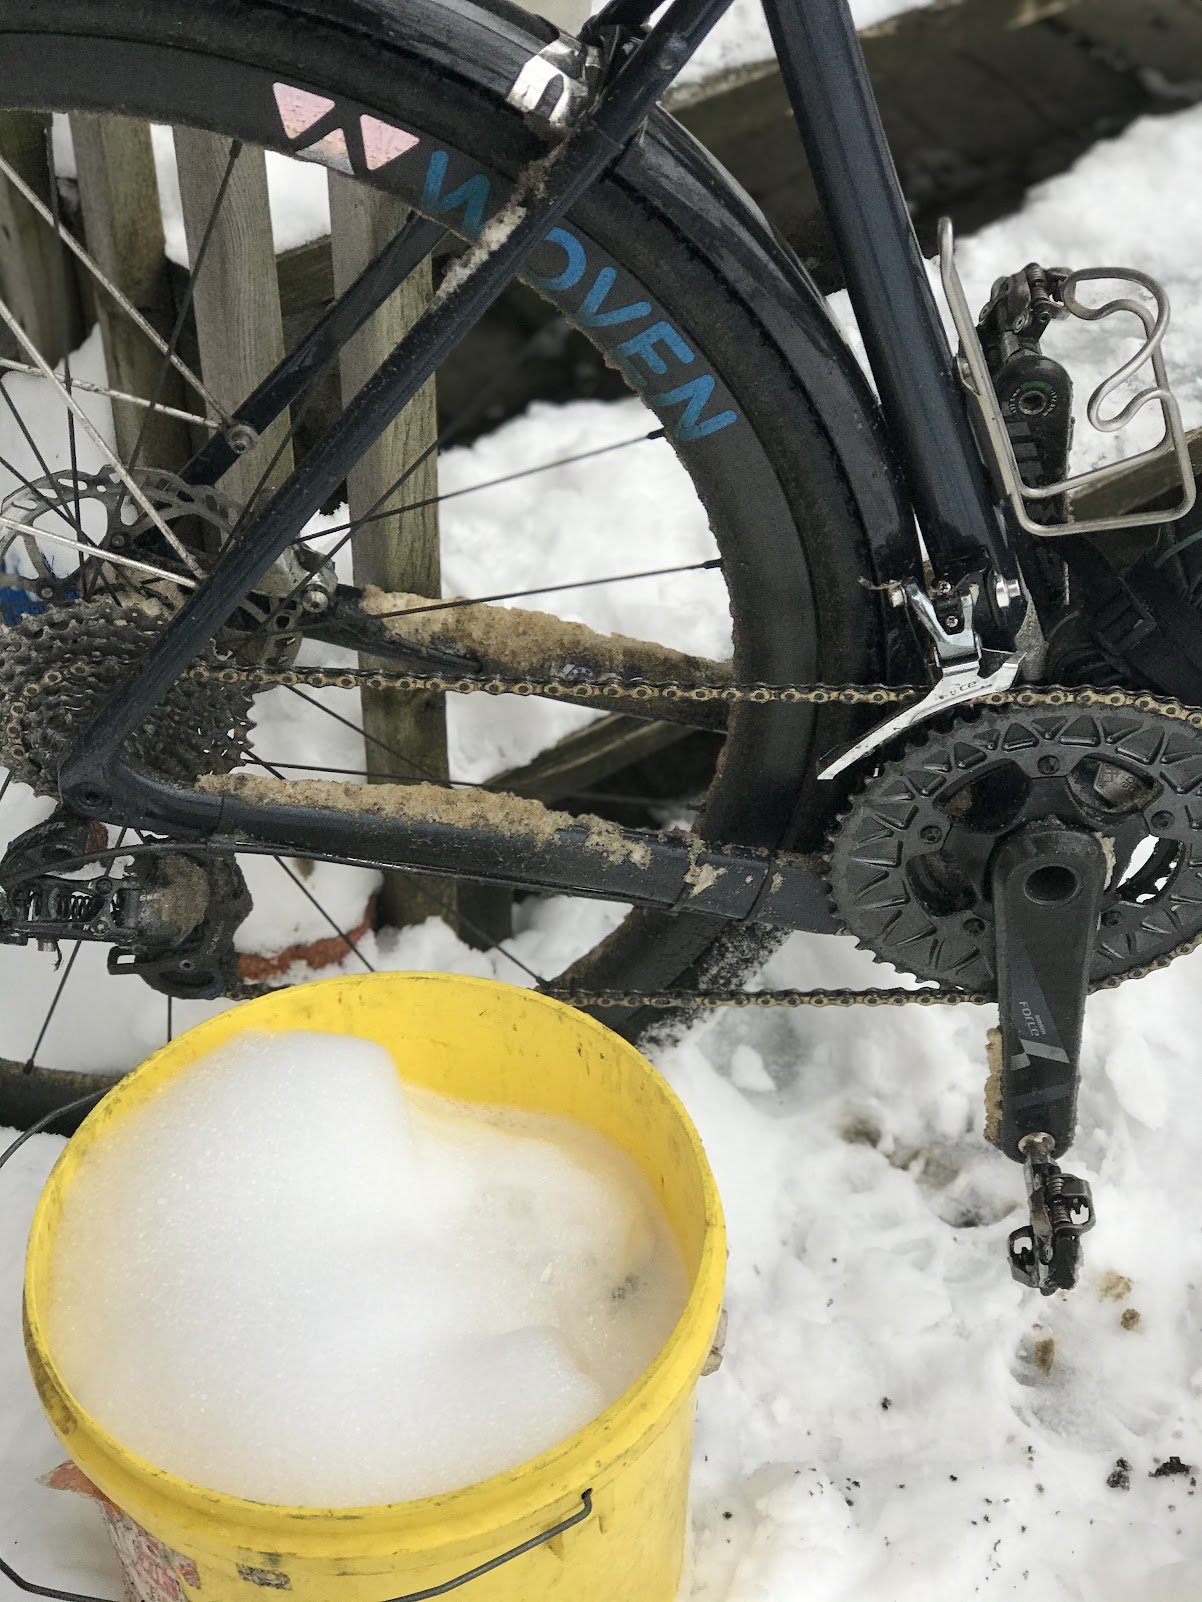 Deter Pro - degreases and cleans your bike